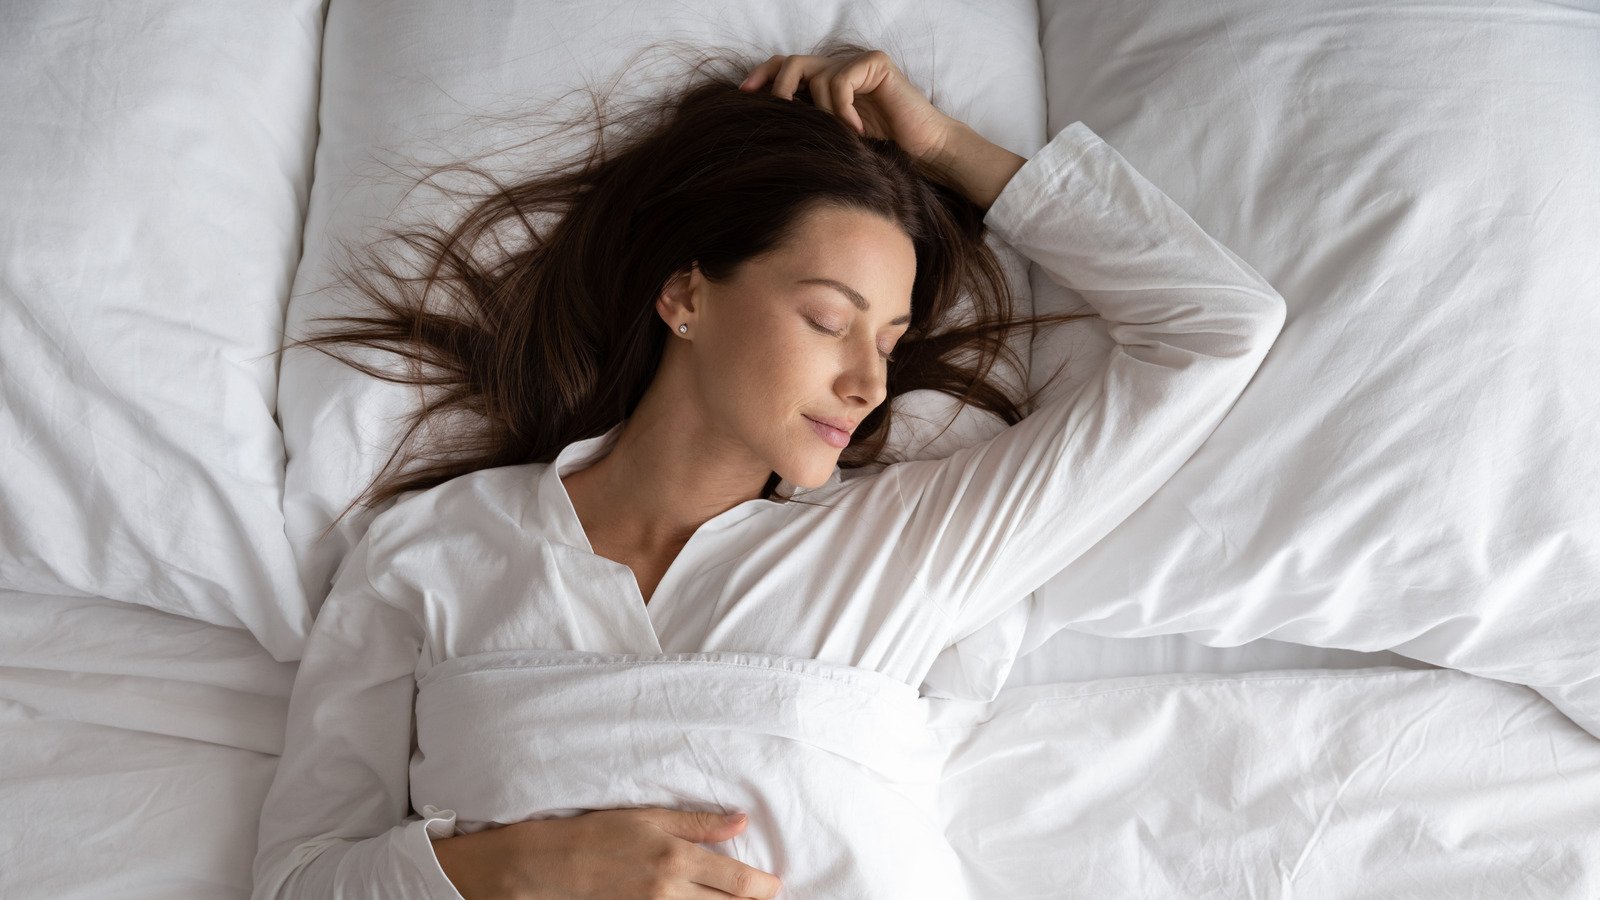 The One Thing You Shouldn't Do With Your Pillow When You Sleep